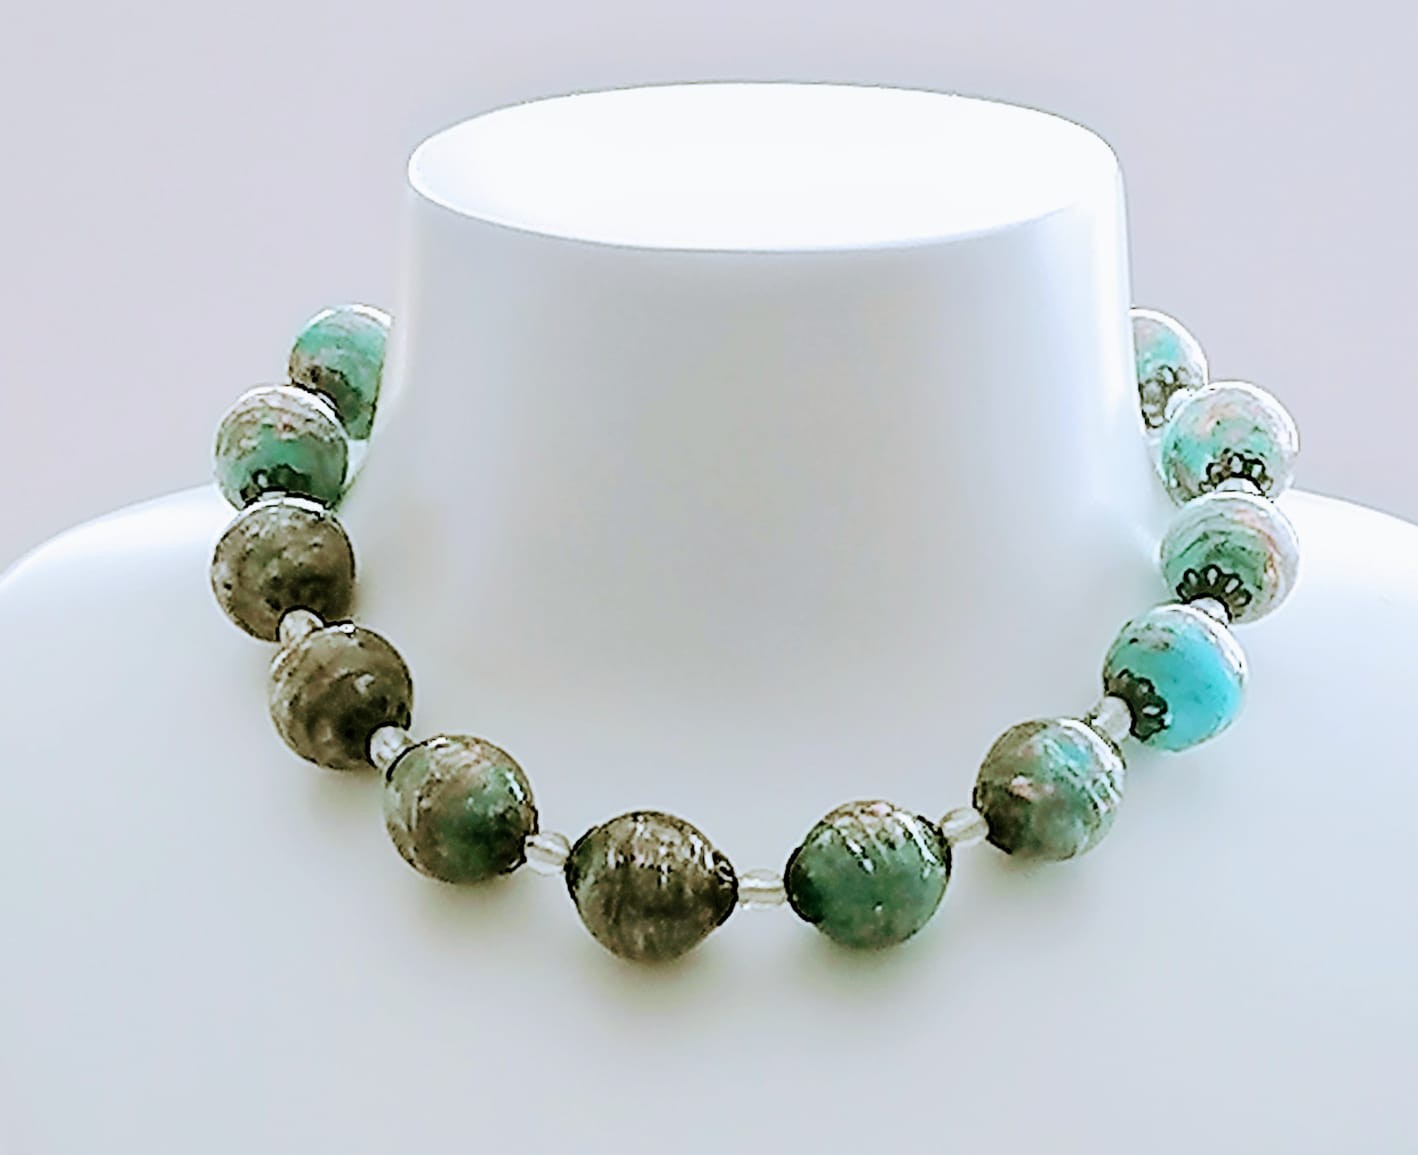 Rare Monart beaded necklace, turquoise with gold aventurine. 14 " (36cms) overall length. - Image 2 of 2